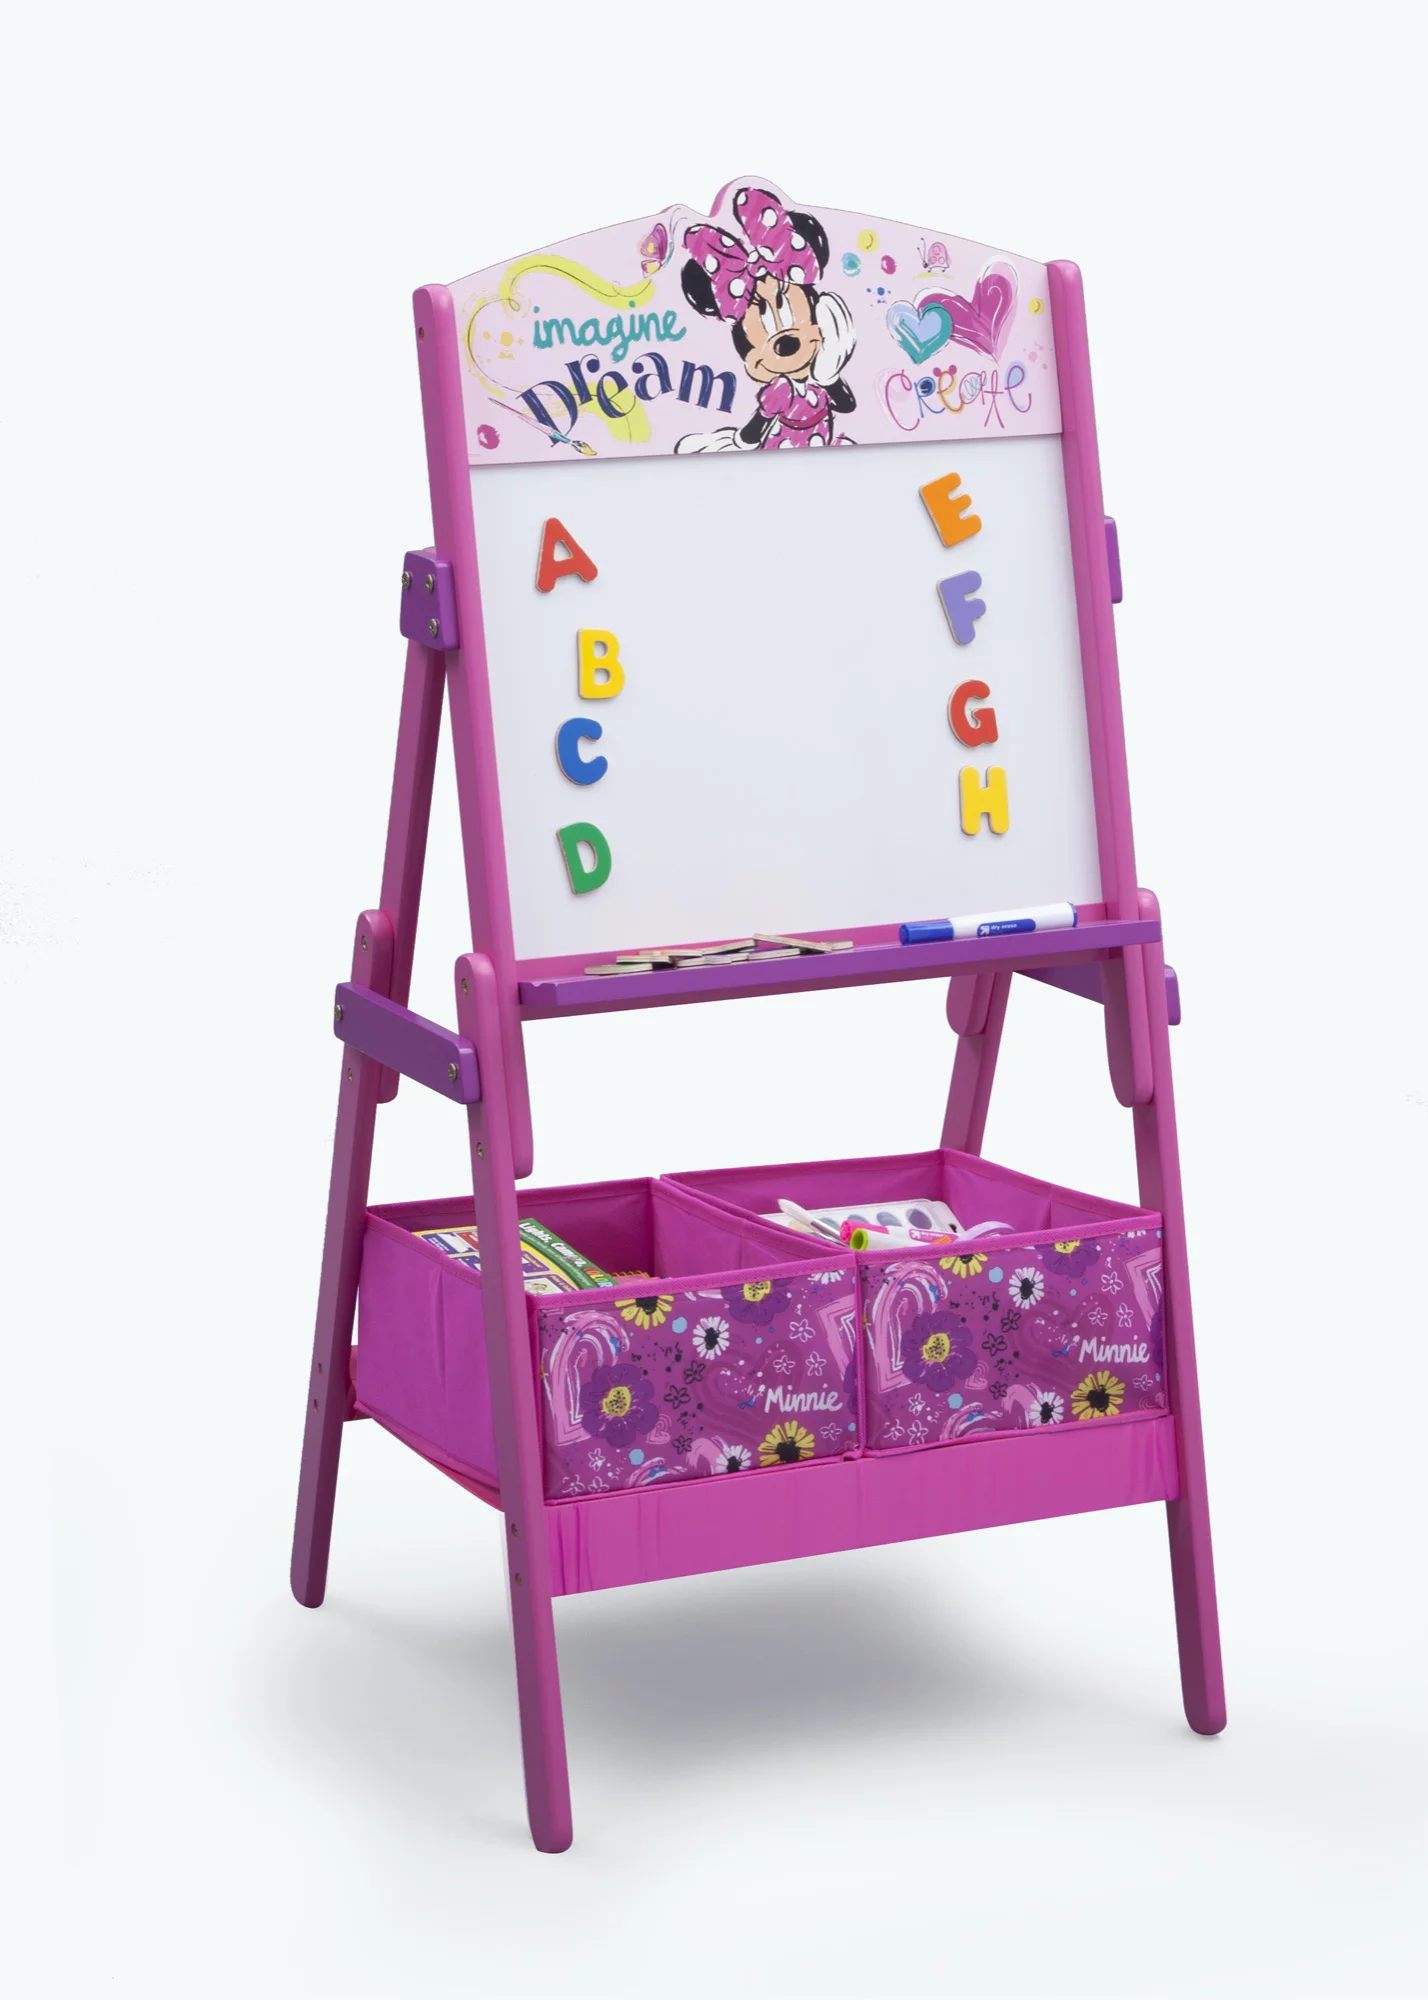 Disney Minnie Mouse Activity Easel with Storage by Delta Children, Greenguard Gold Certified